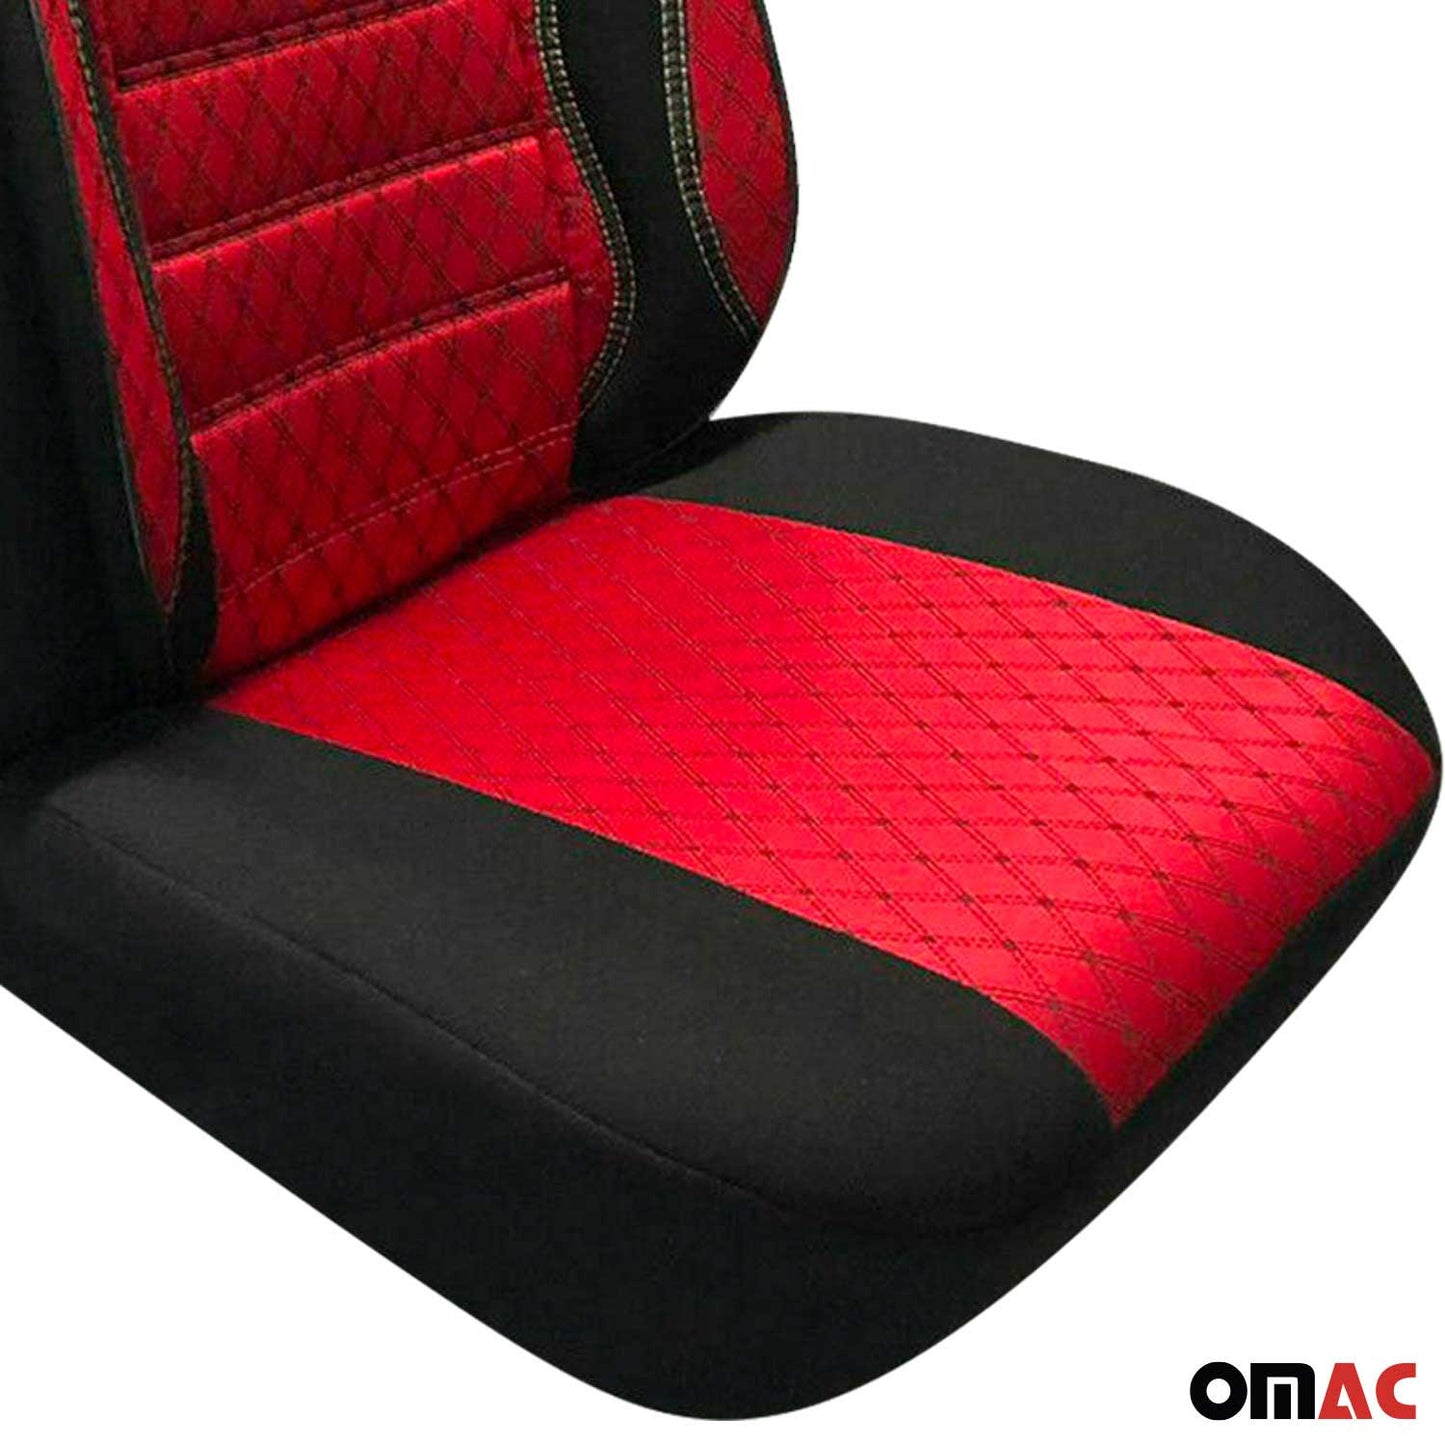 OMAC Front Car Seat Covers Protector for VW Eurovan 1993-2003 Black Red 2+1 Set 96311KS1-SET